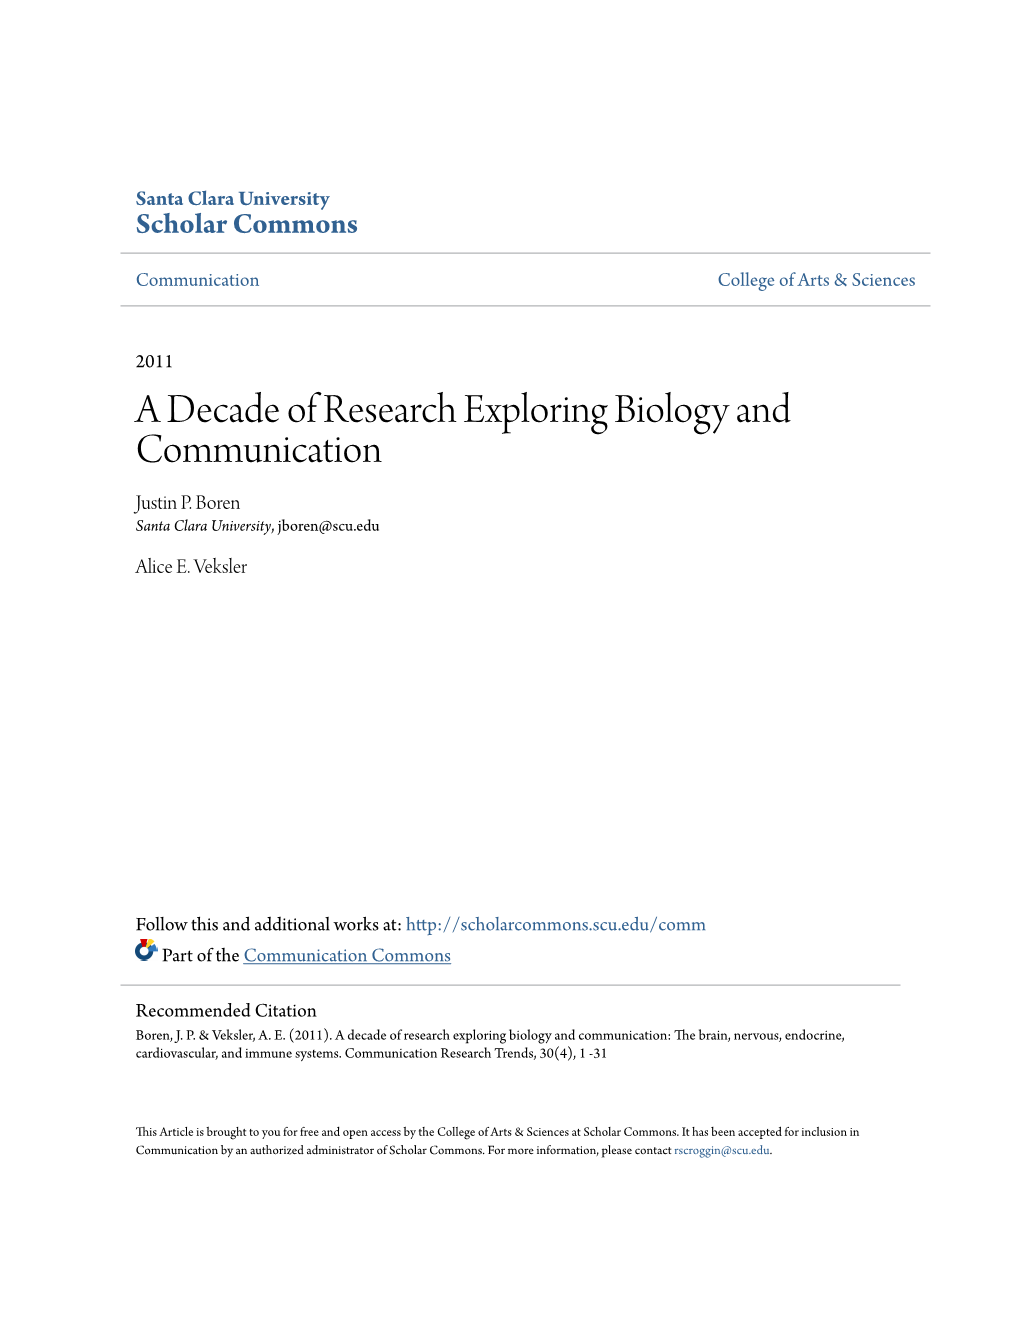 A Decade of Research Exploring Biology and Communication Justin P